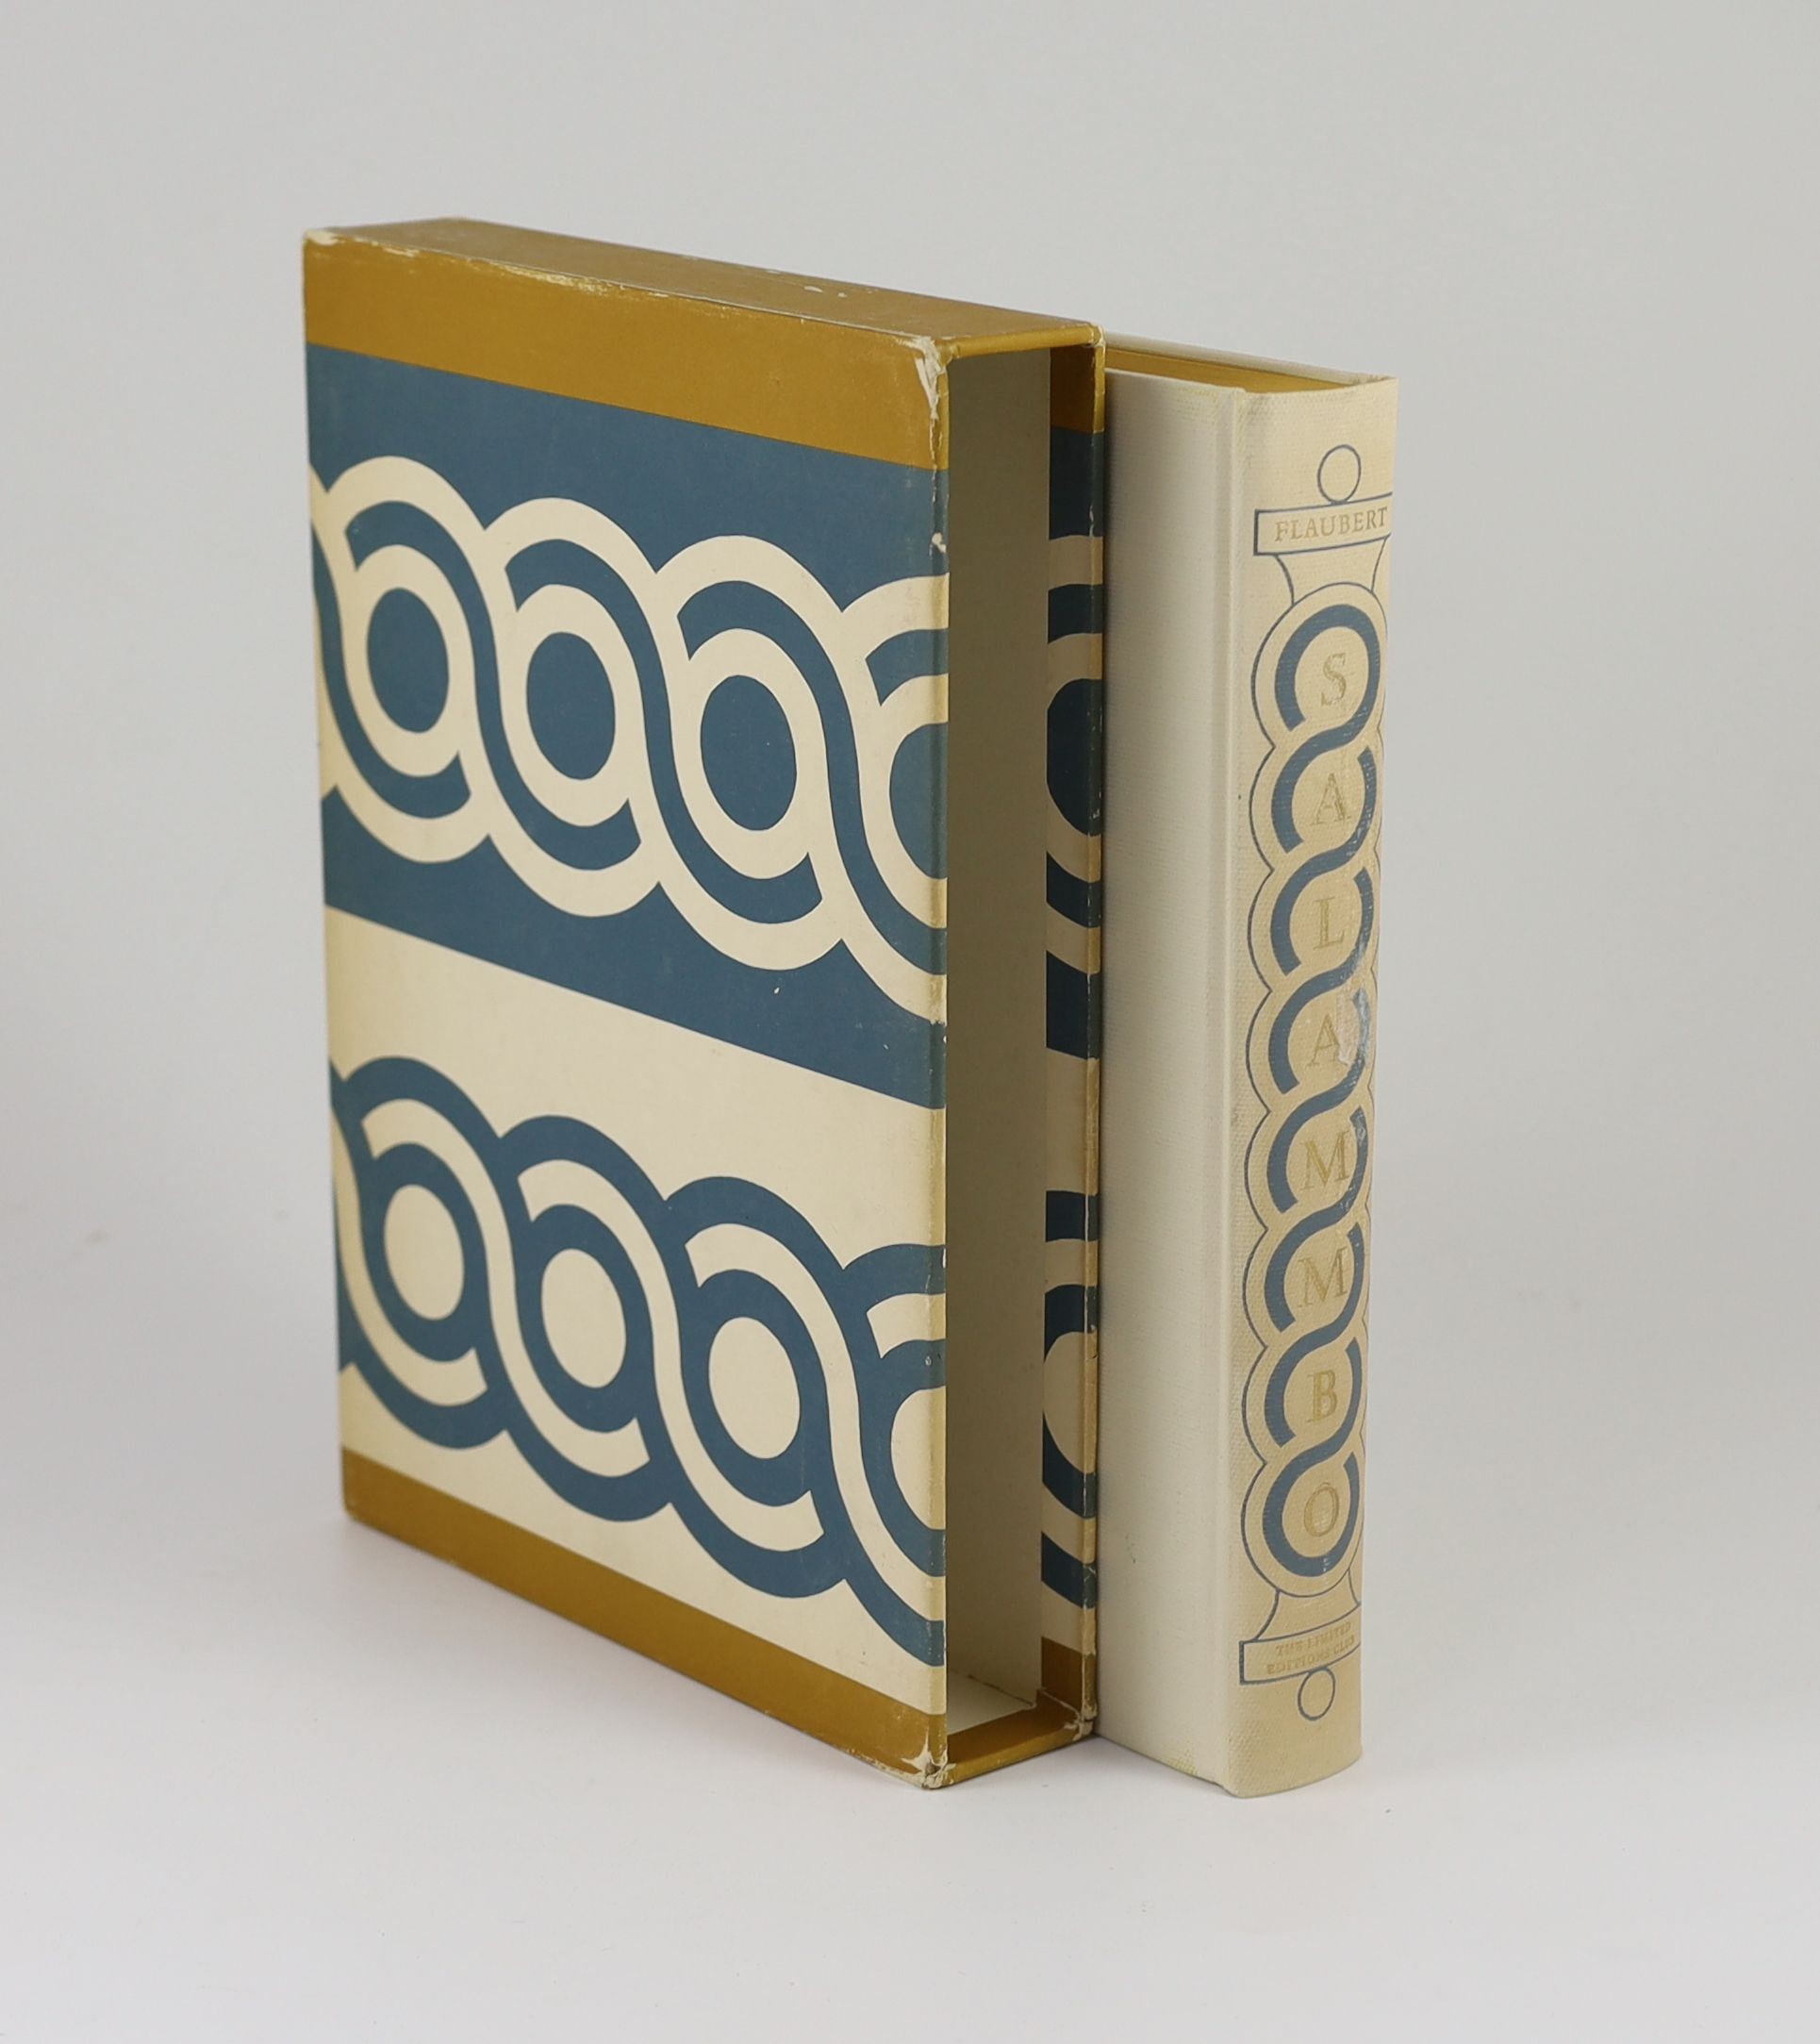 Flaubert, Gustavo - Salammbo, one of 1500, signed and illustrated by Edward Bawden with 8 double-page colour plates, 4to, ivory buckram, Limited Editions Club, Ipswich, 1960, with slip case.